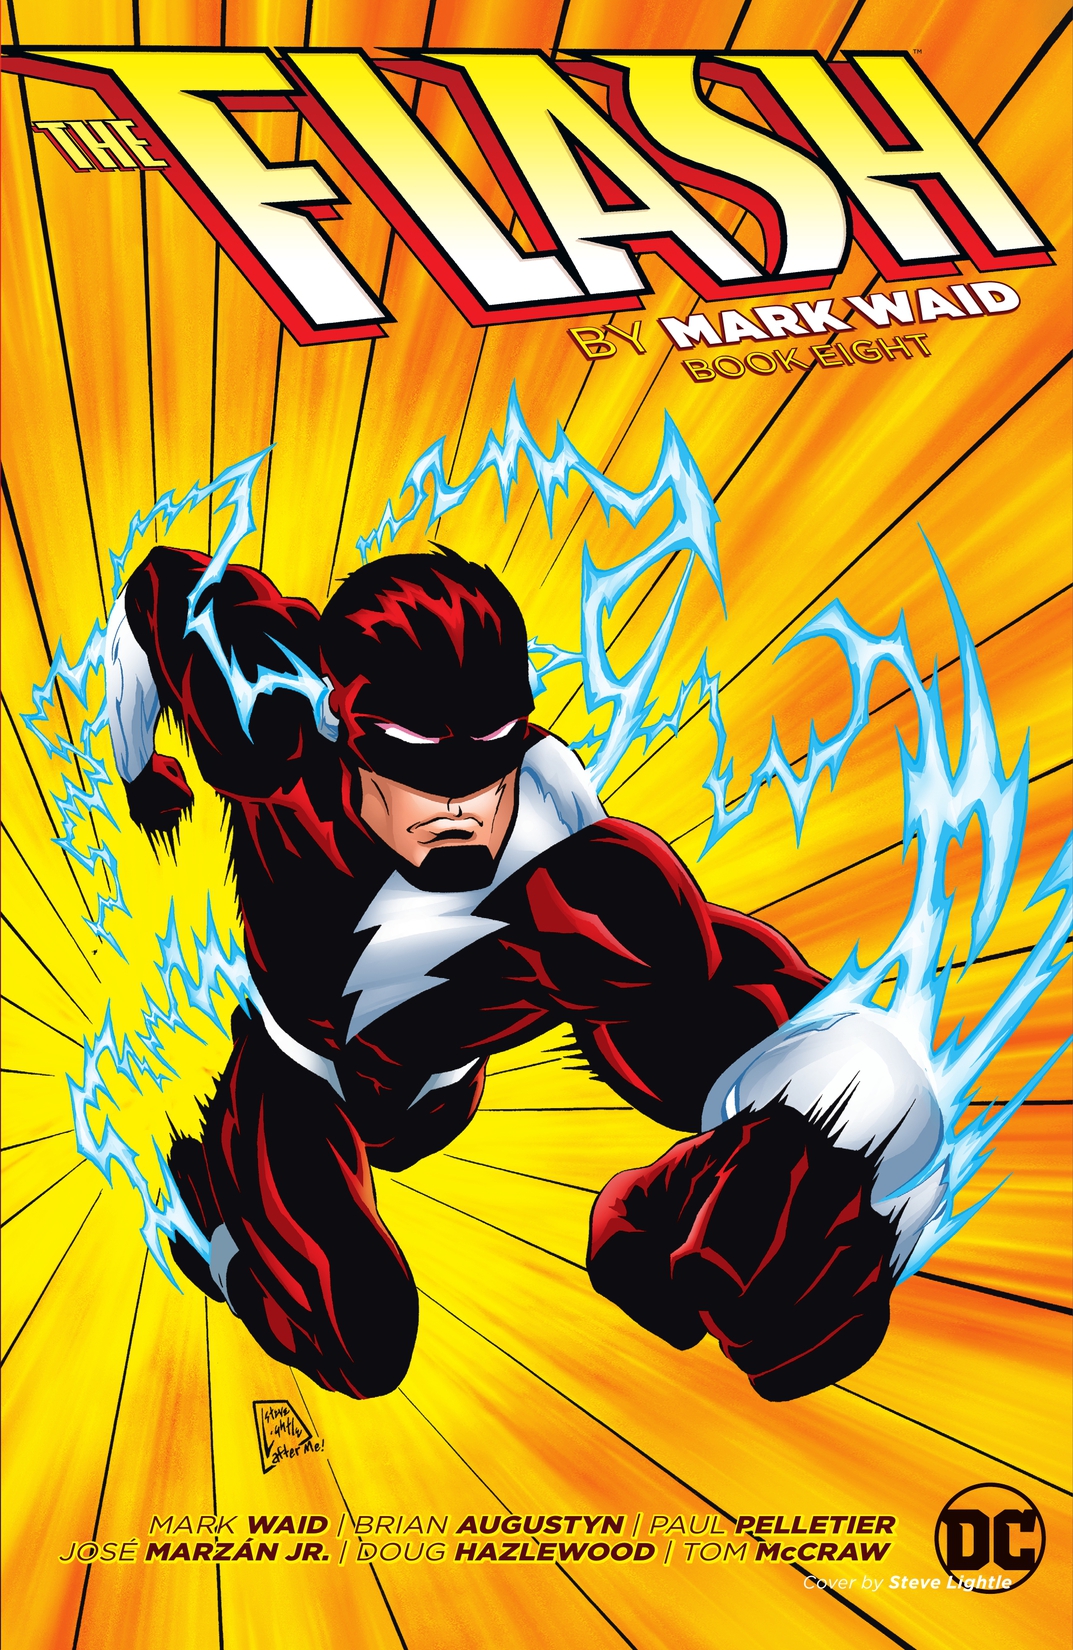 The Flash by Mark Waid Book Eight preview images